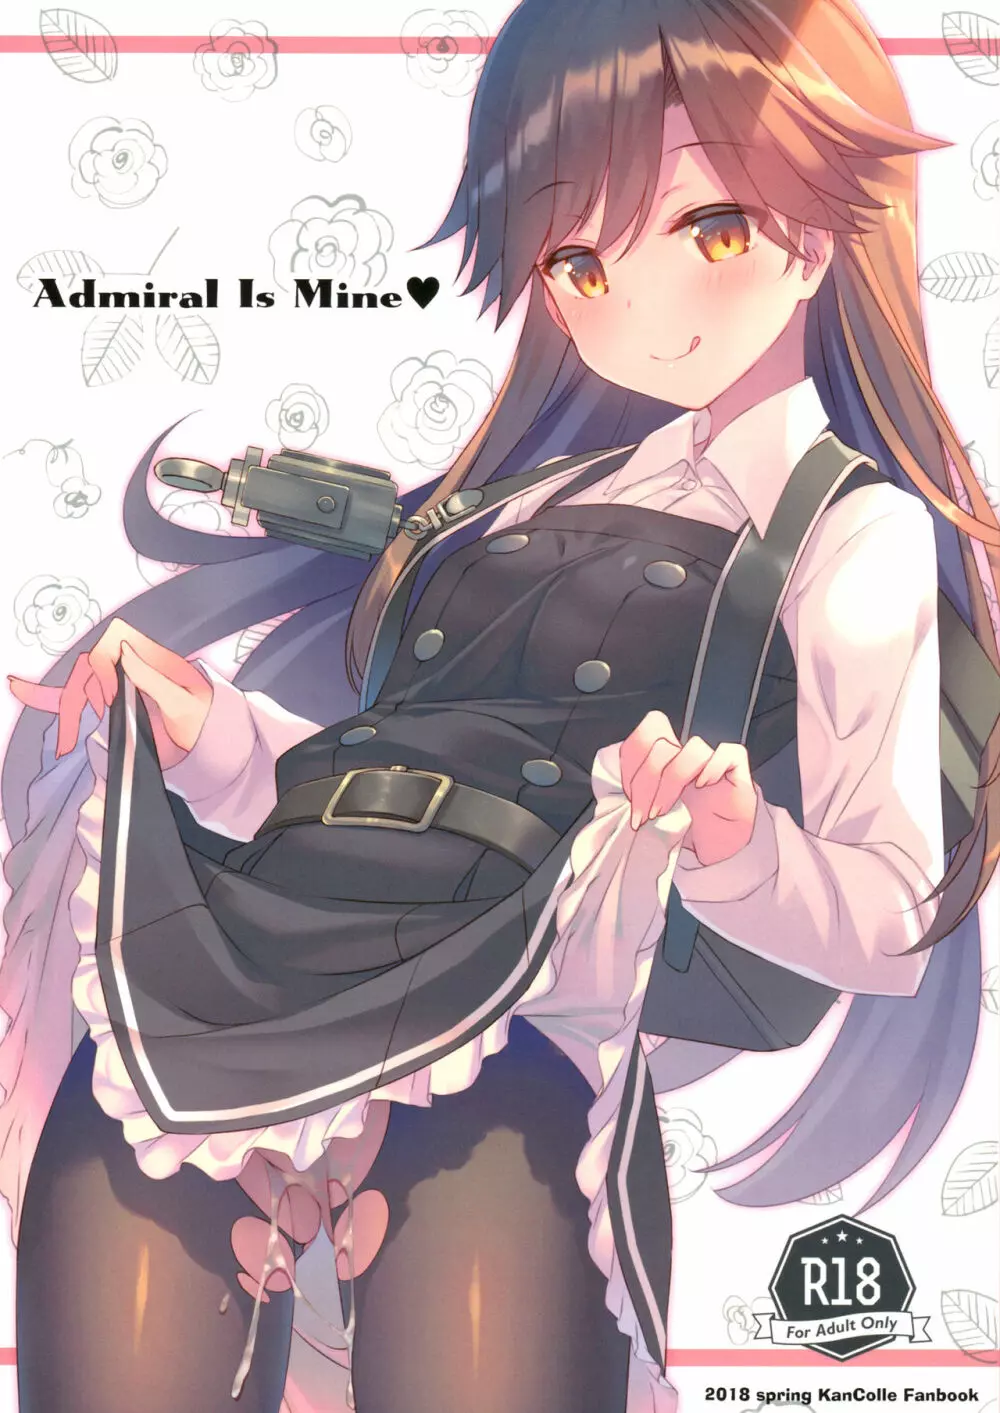 Admiral Is Mine♥ - page1